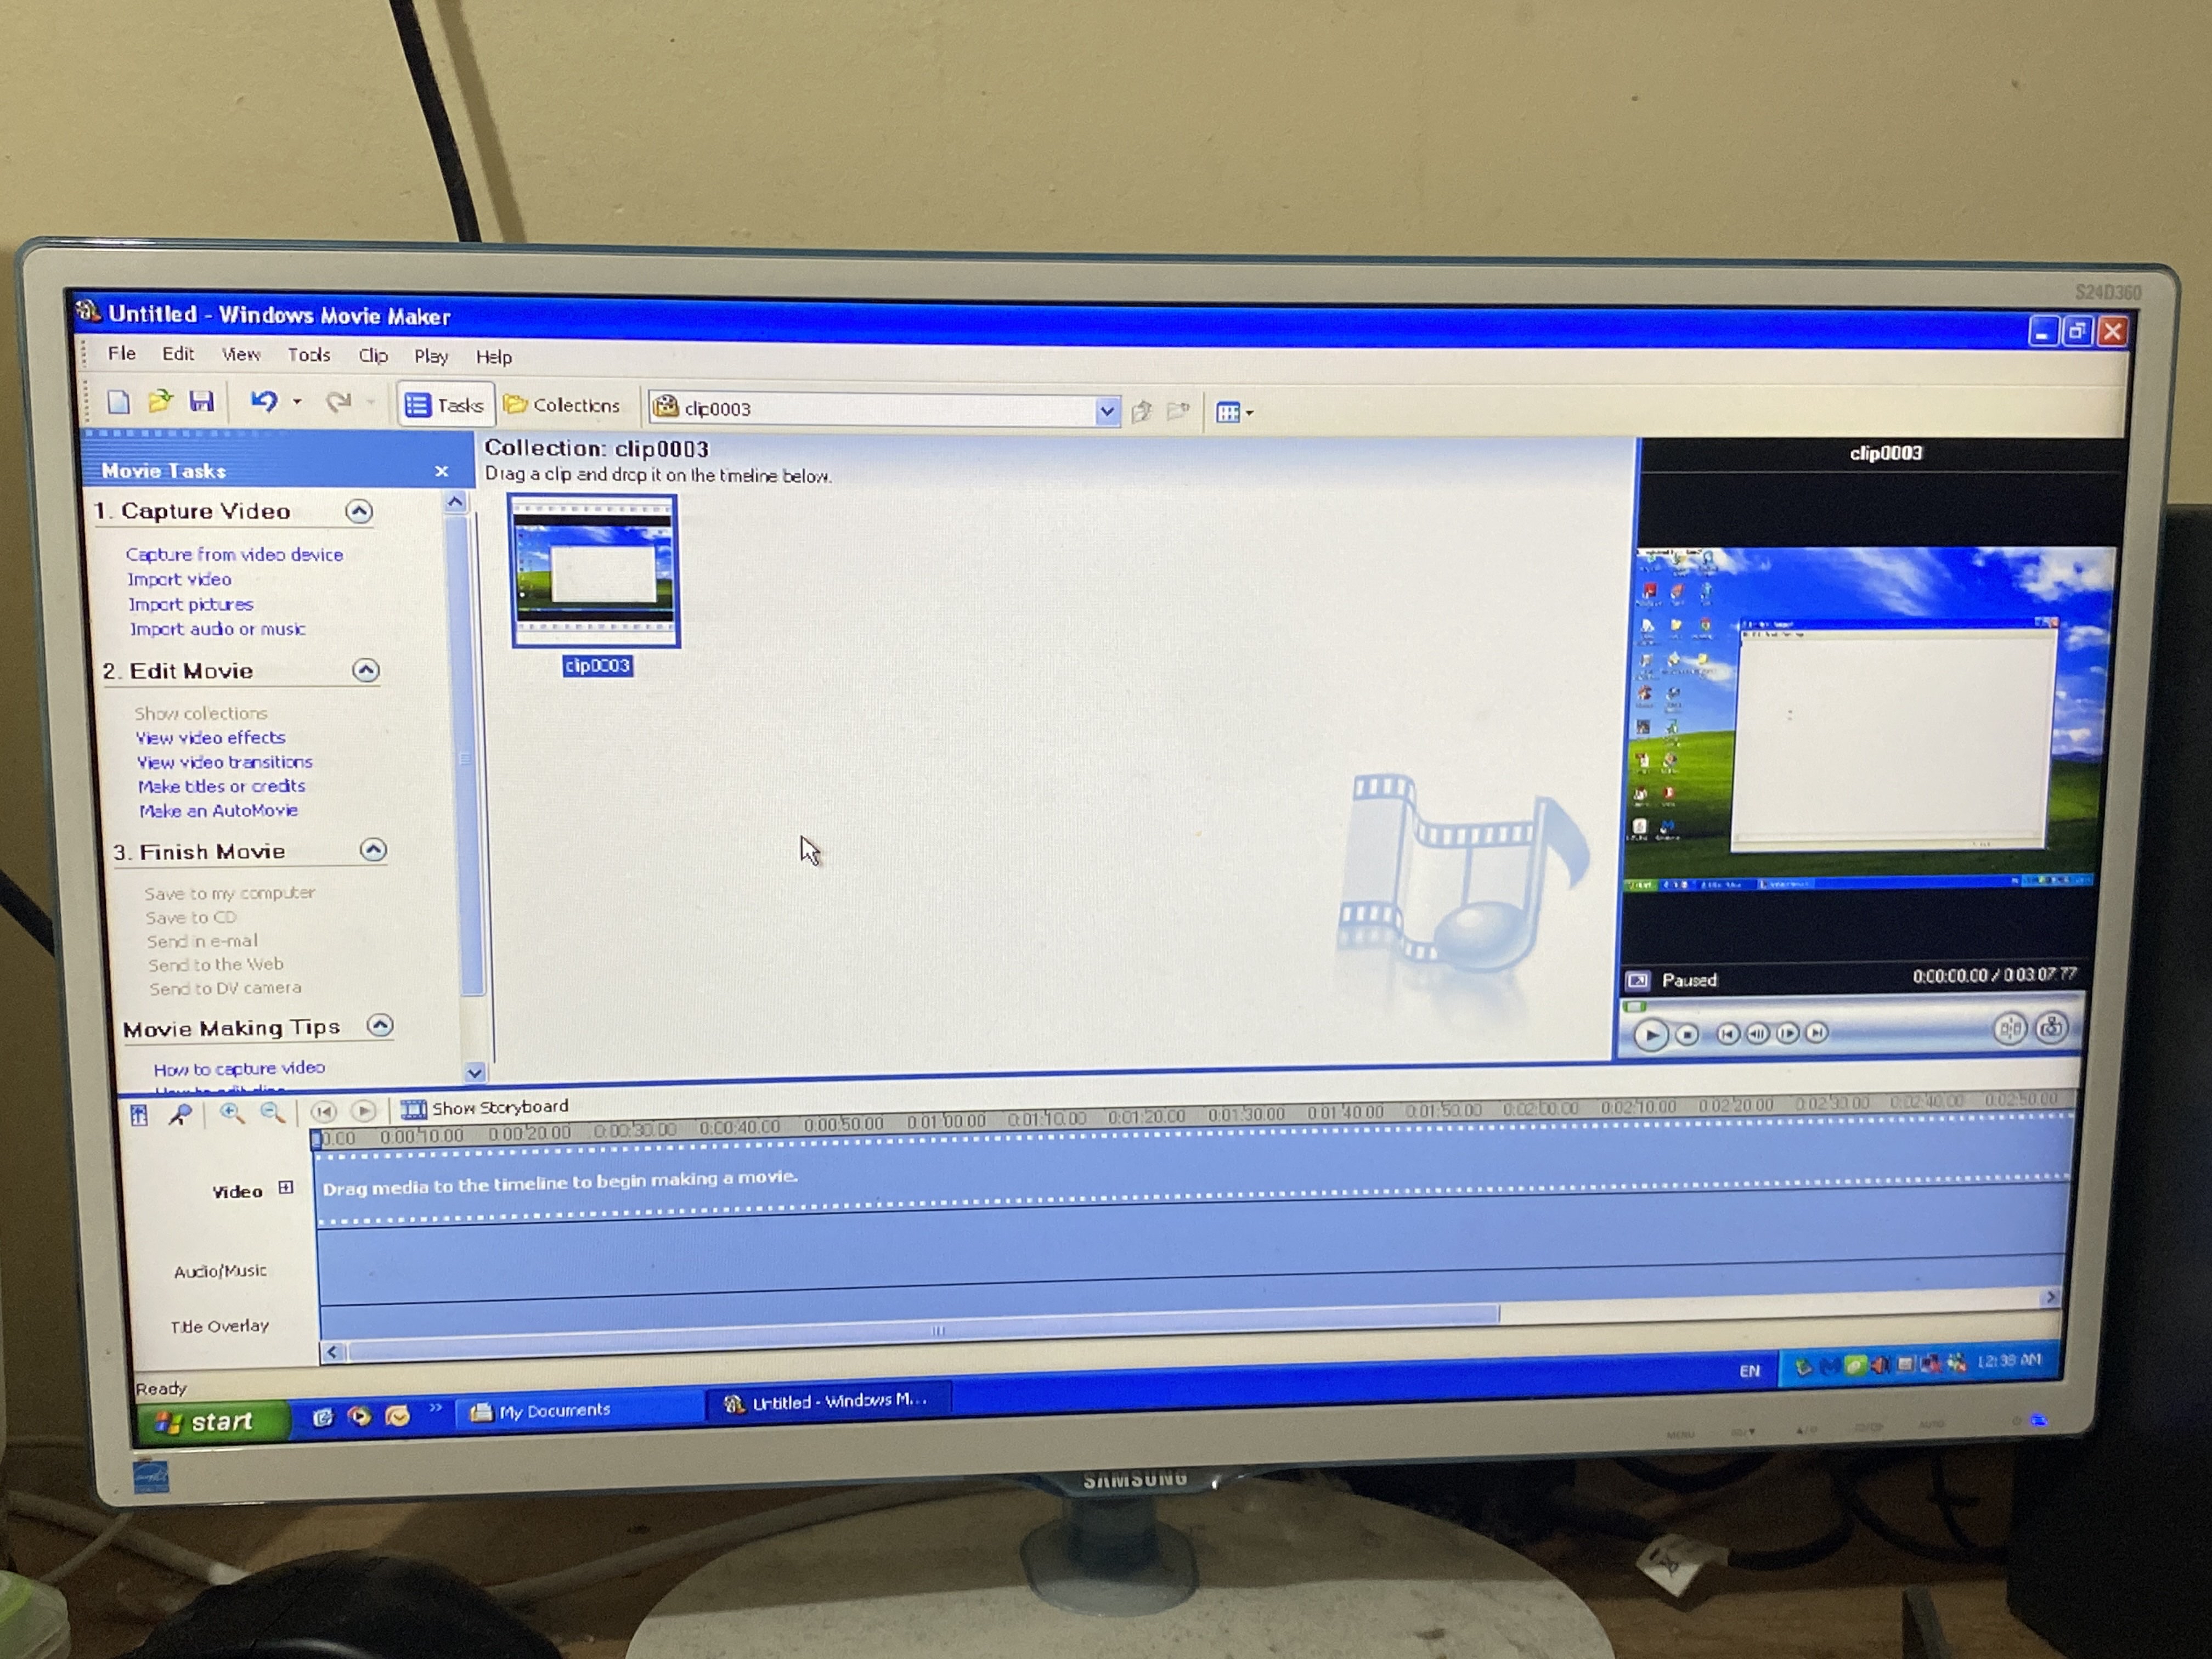 A using Windows Movie Maker for a dumb edit.